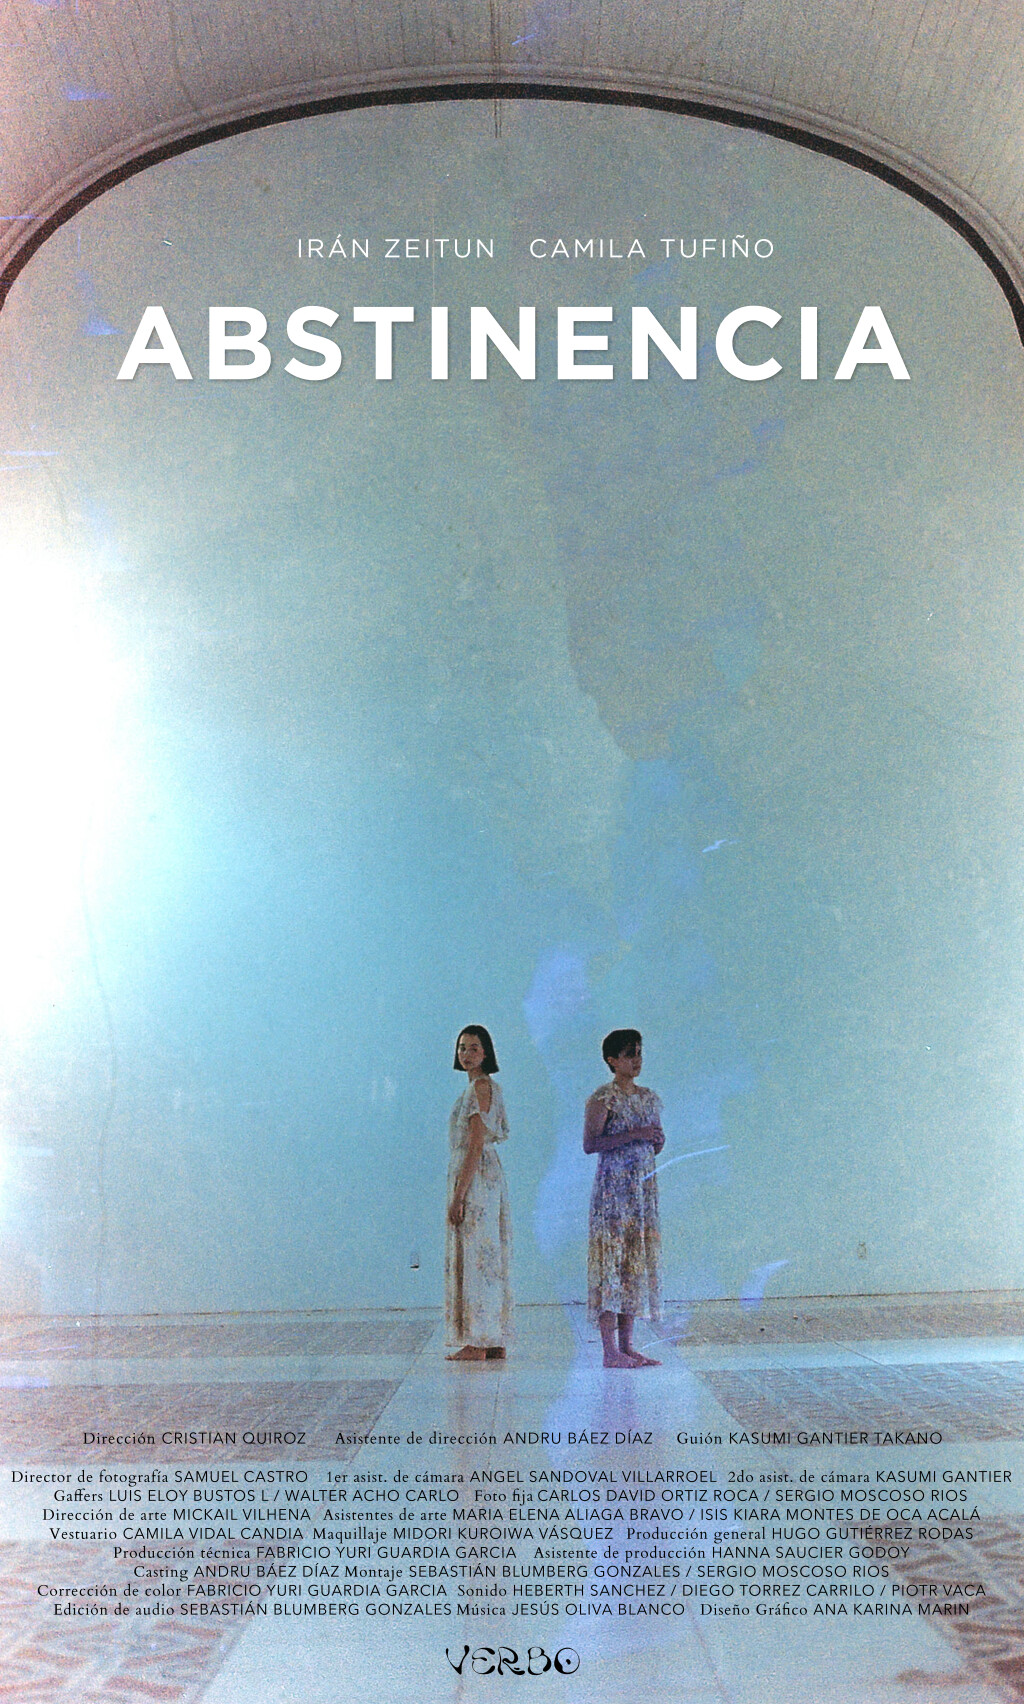 Filmposter for Abstinencia 